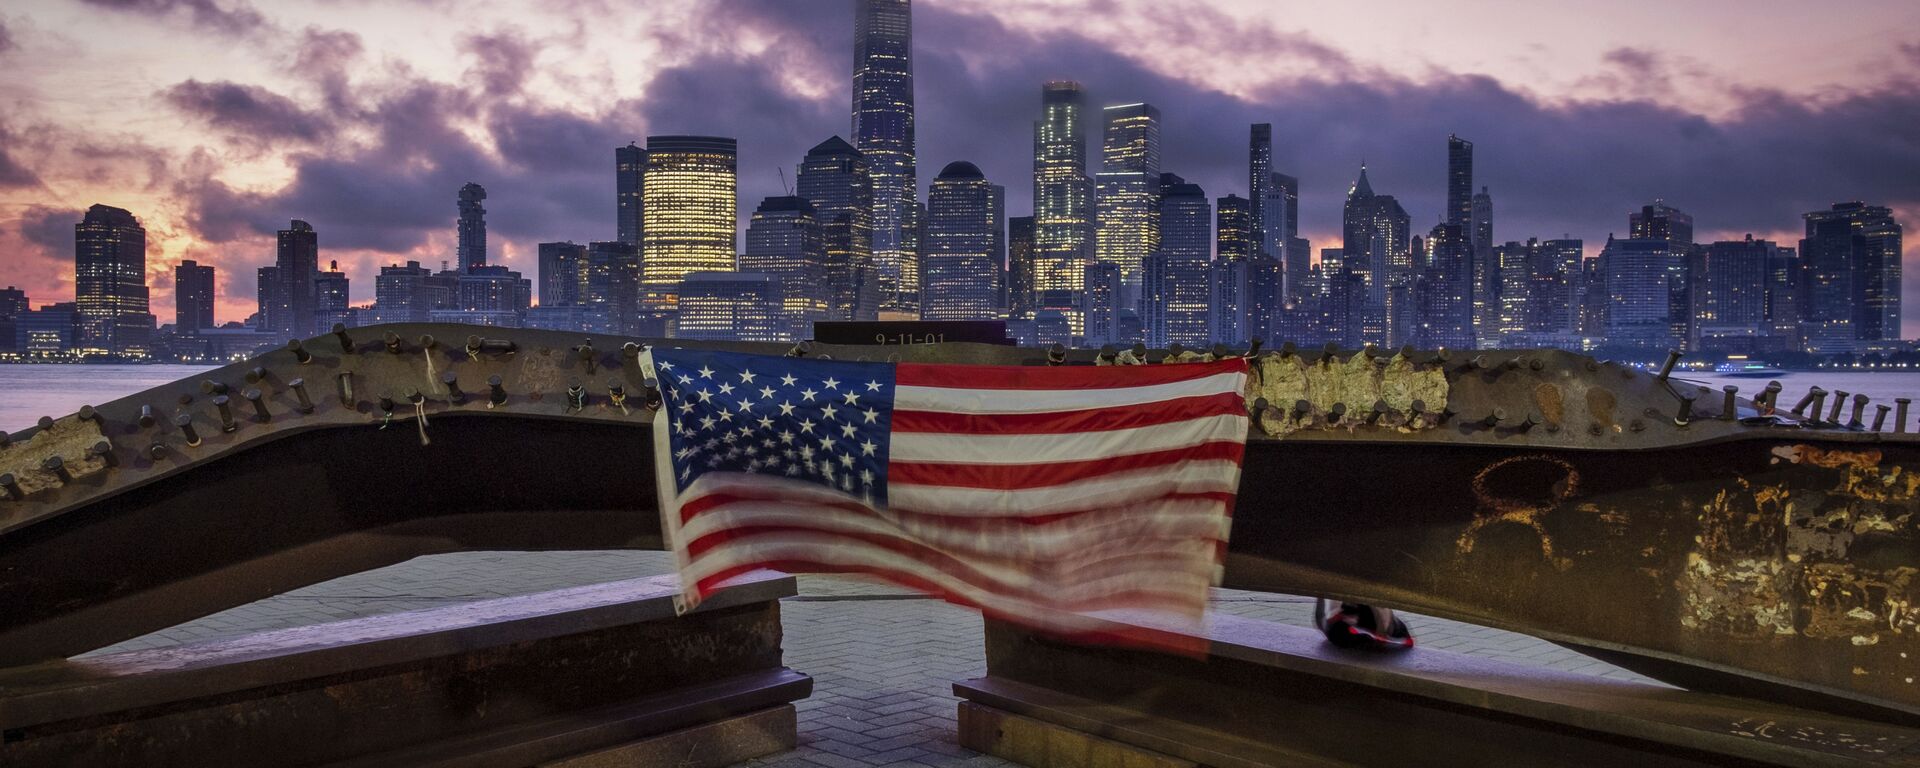 A US flag hanging from a steel girder, damaged in the 11 September 2001 attacks on the World Trade Center, blows in the breeze at a memorial in Jersey City, New Jersey on 11 September 2019. - Sputnik International, 1920, 06.09.2021